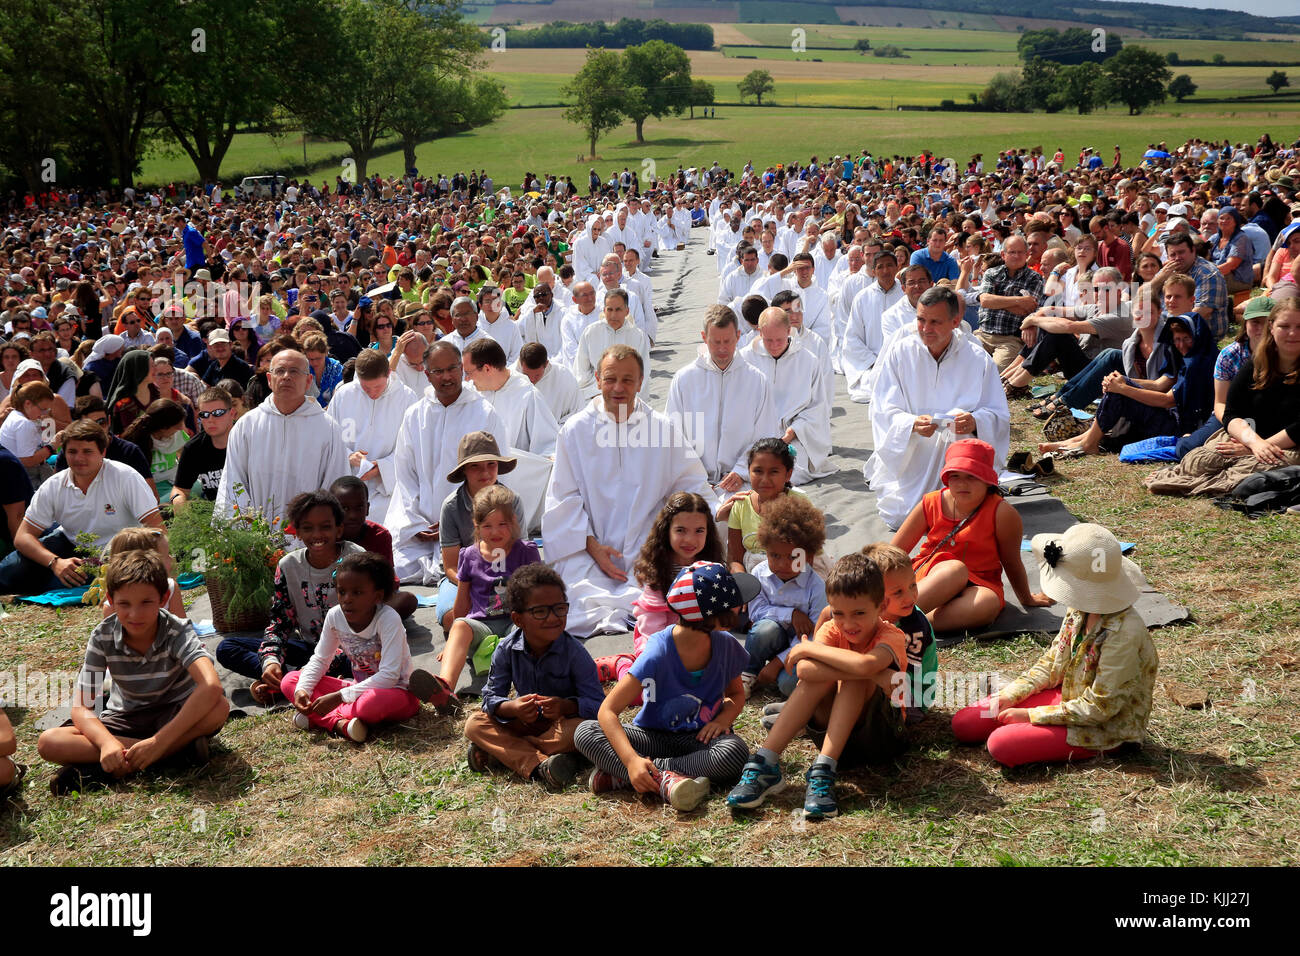 Taize ecumenical community. Gathering for a New Solidarity.   France. Stock Photo